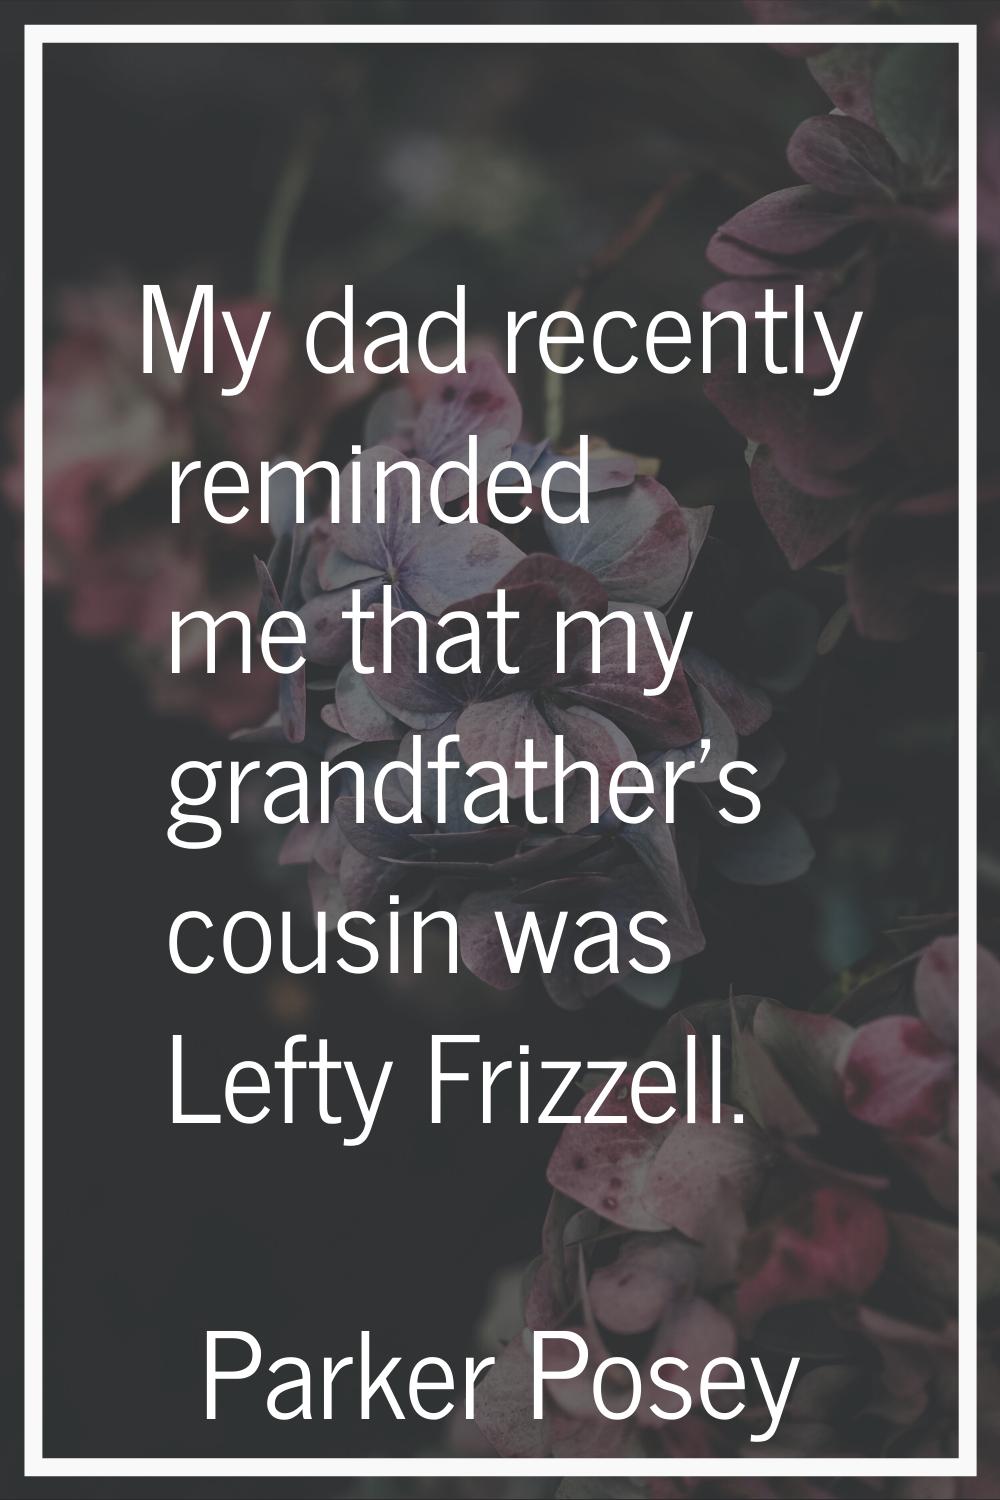 My dad recently reminded me that my grandfather's cousin was Lefty Frizzell.